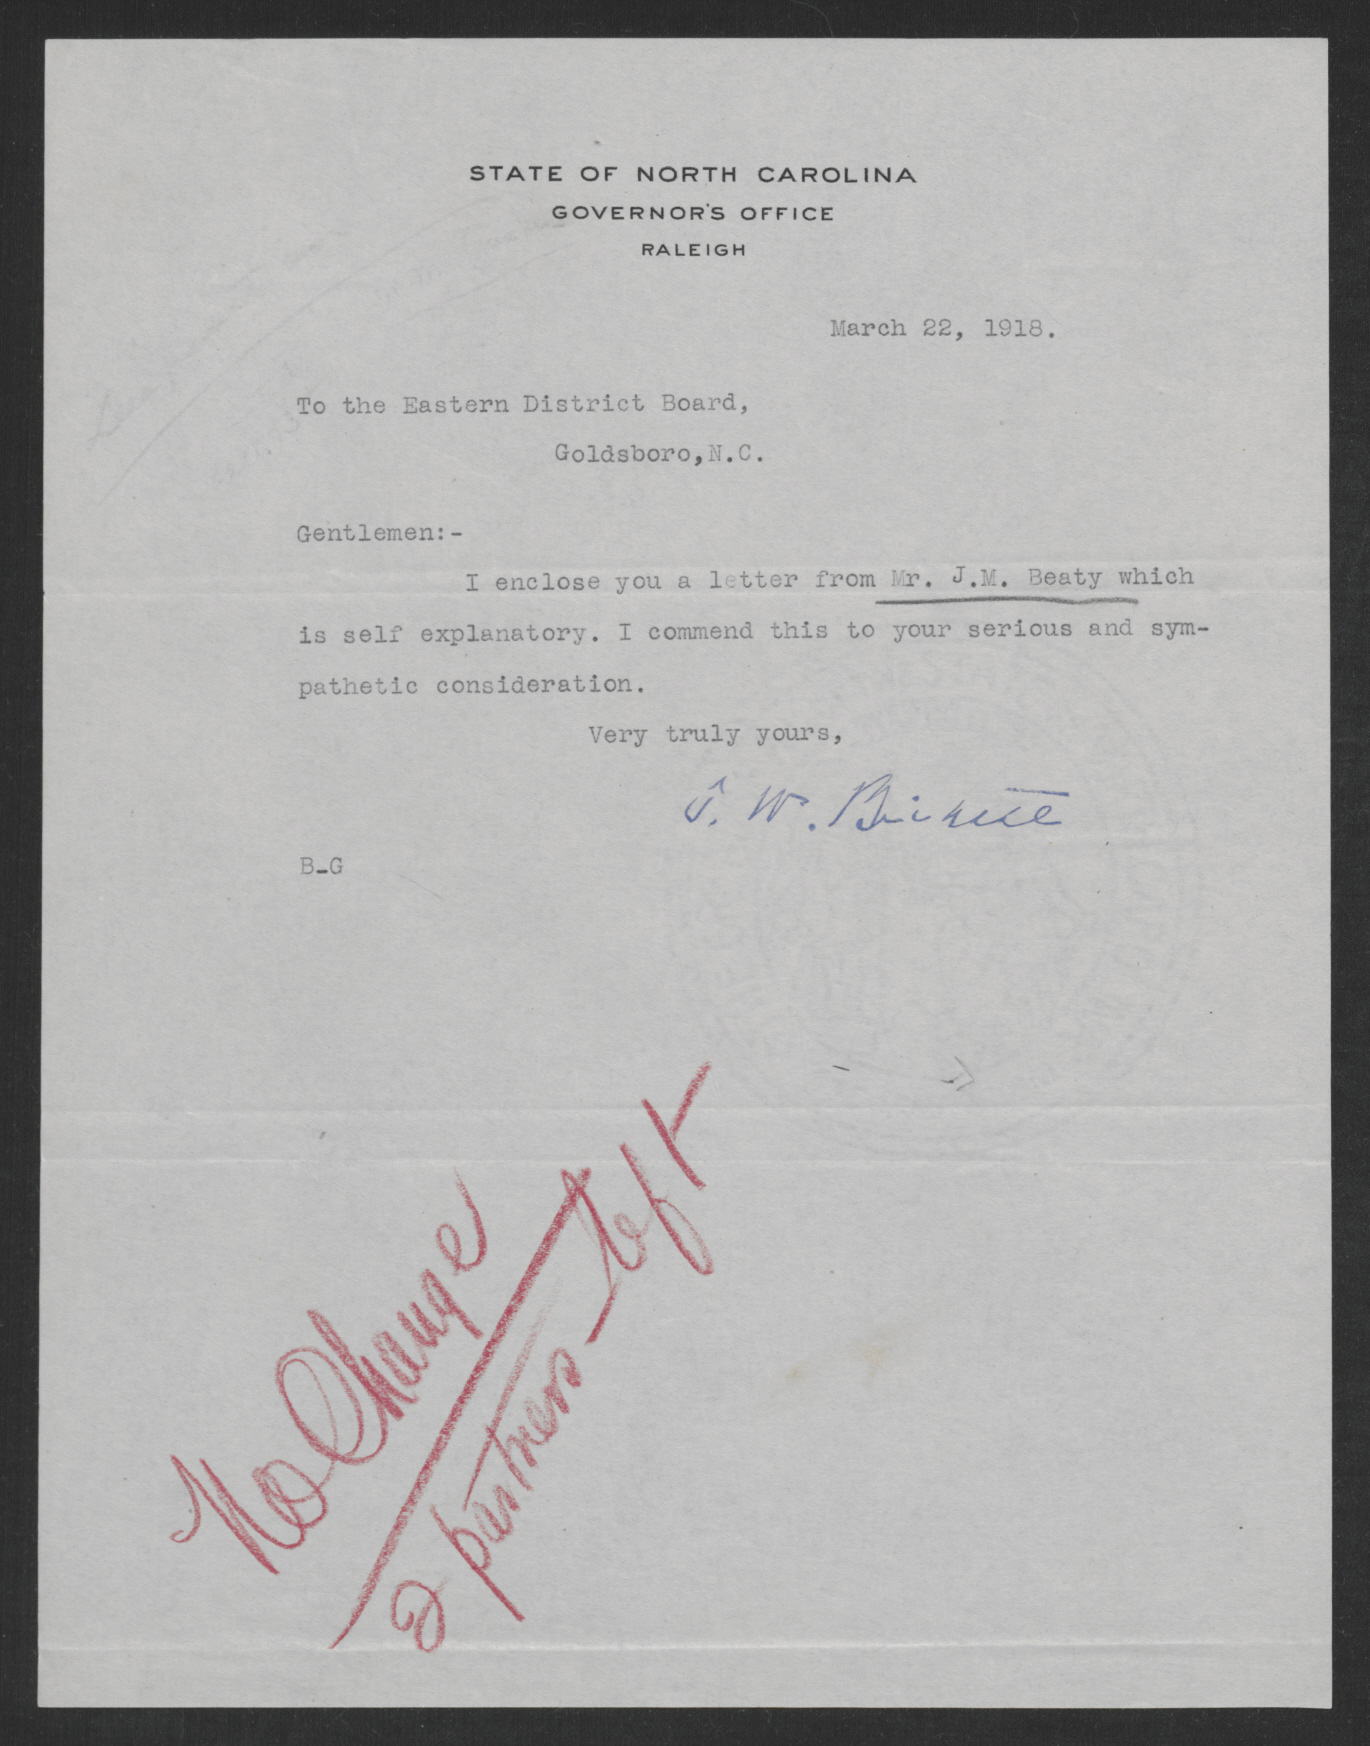 Letter from Thomas W. Bickett to the Eastern District Exemption Board, March 22, 1918